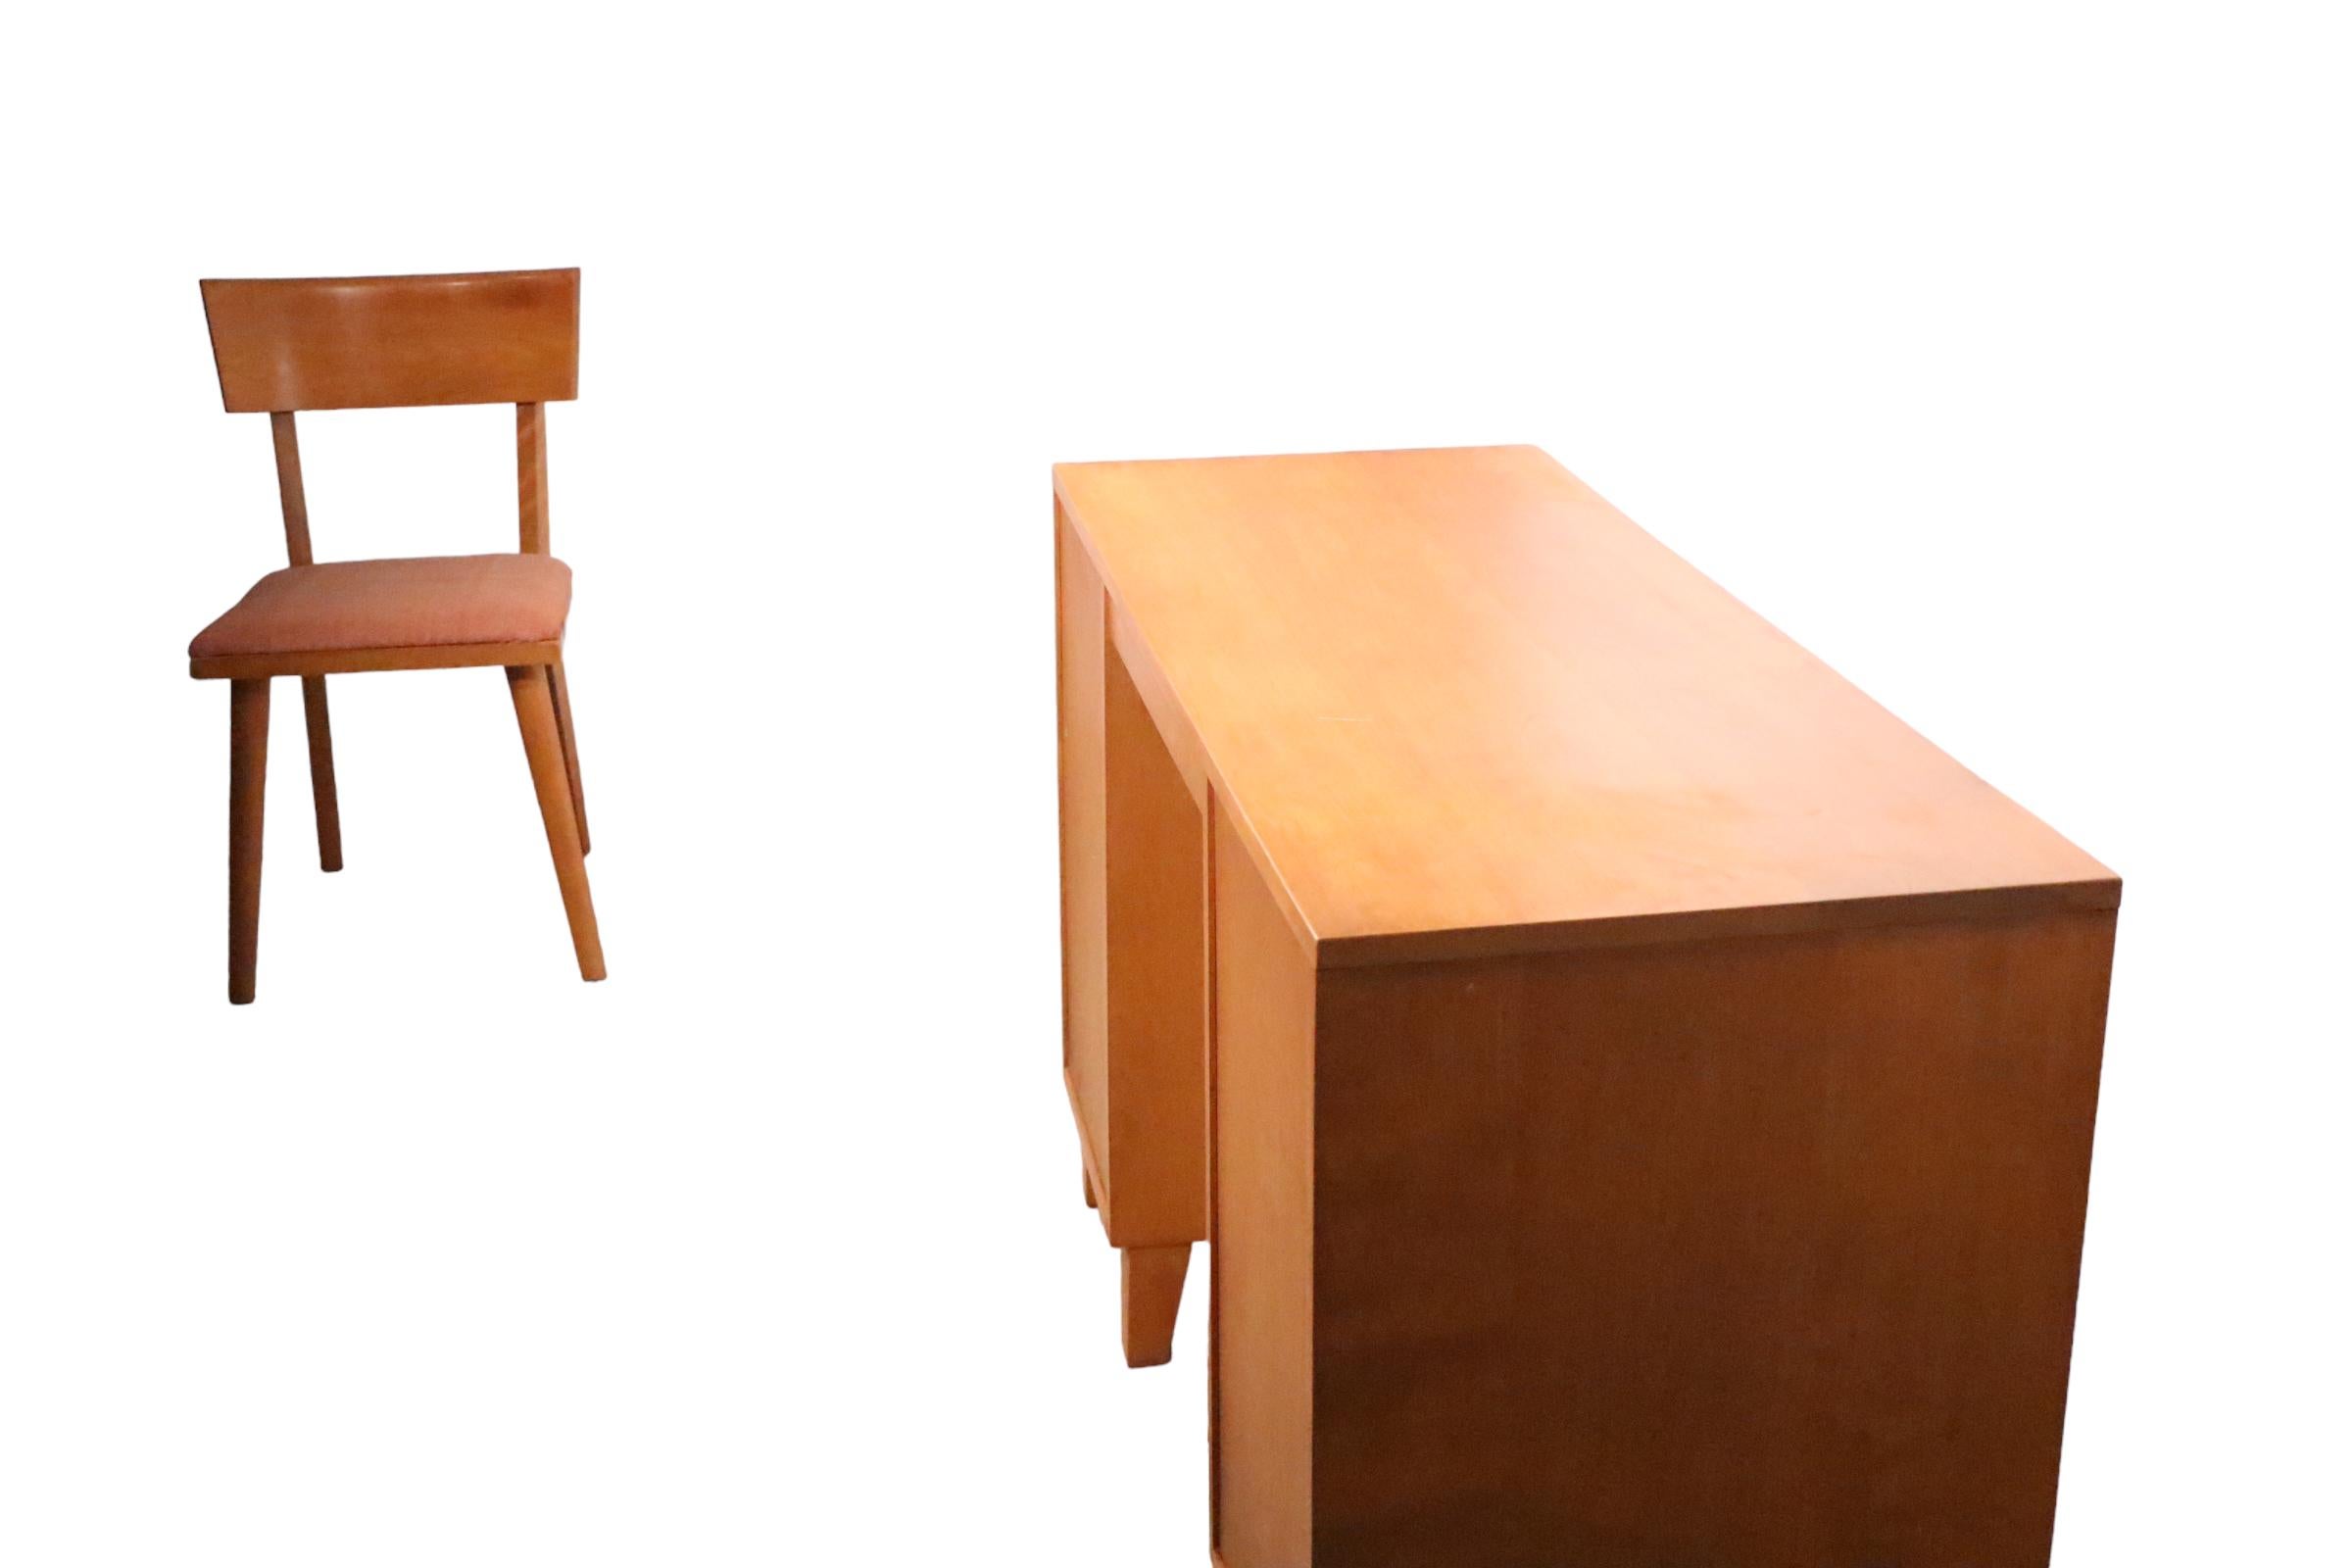 Wood 1950's Mid Century Desk and Chair Conant Ball  Modern Mates by Leslie Diamond   For Sale